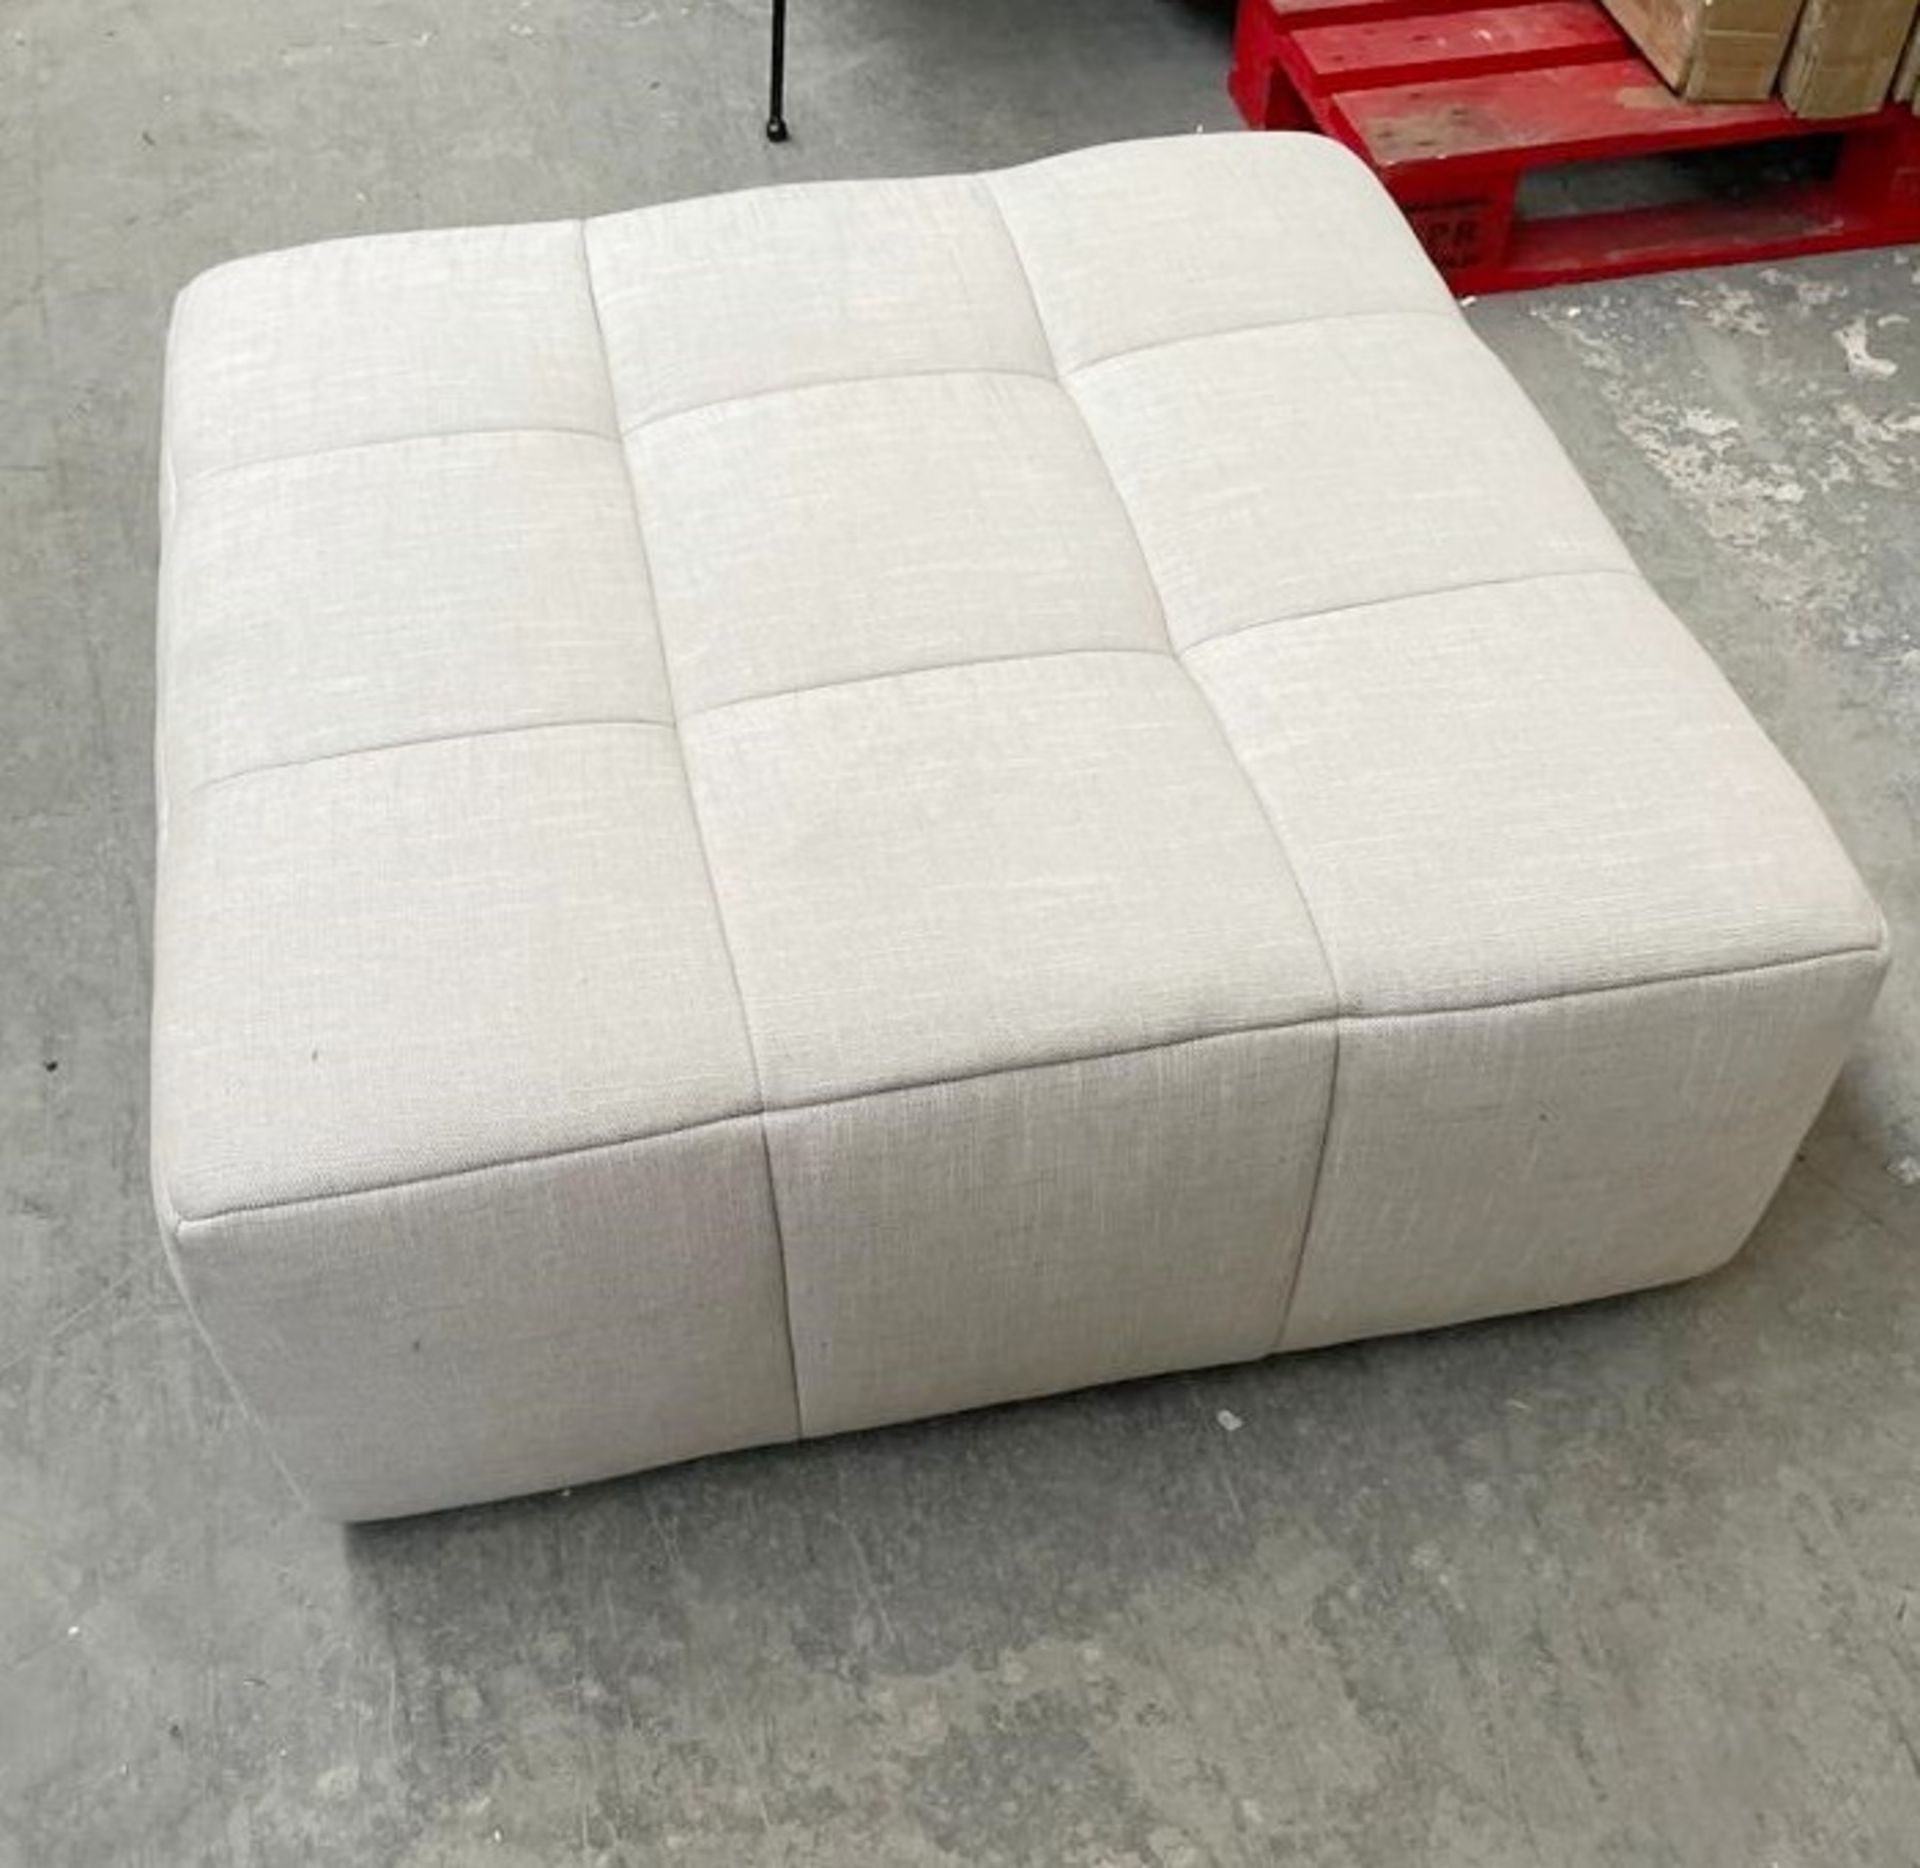 1 x Cloud9 Large Upholstered Foot Stool In A Stone Effect Shade - Dimensions: 35(h) x 90(d) x 90(